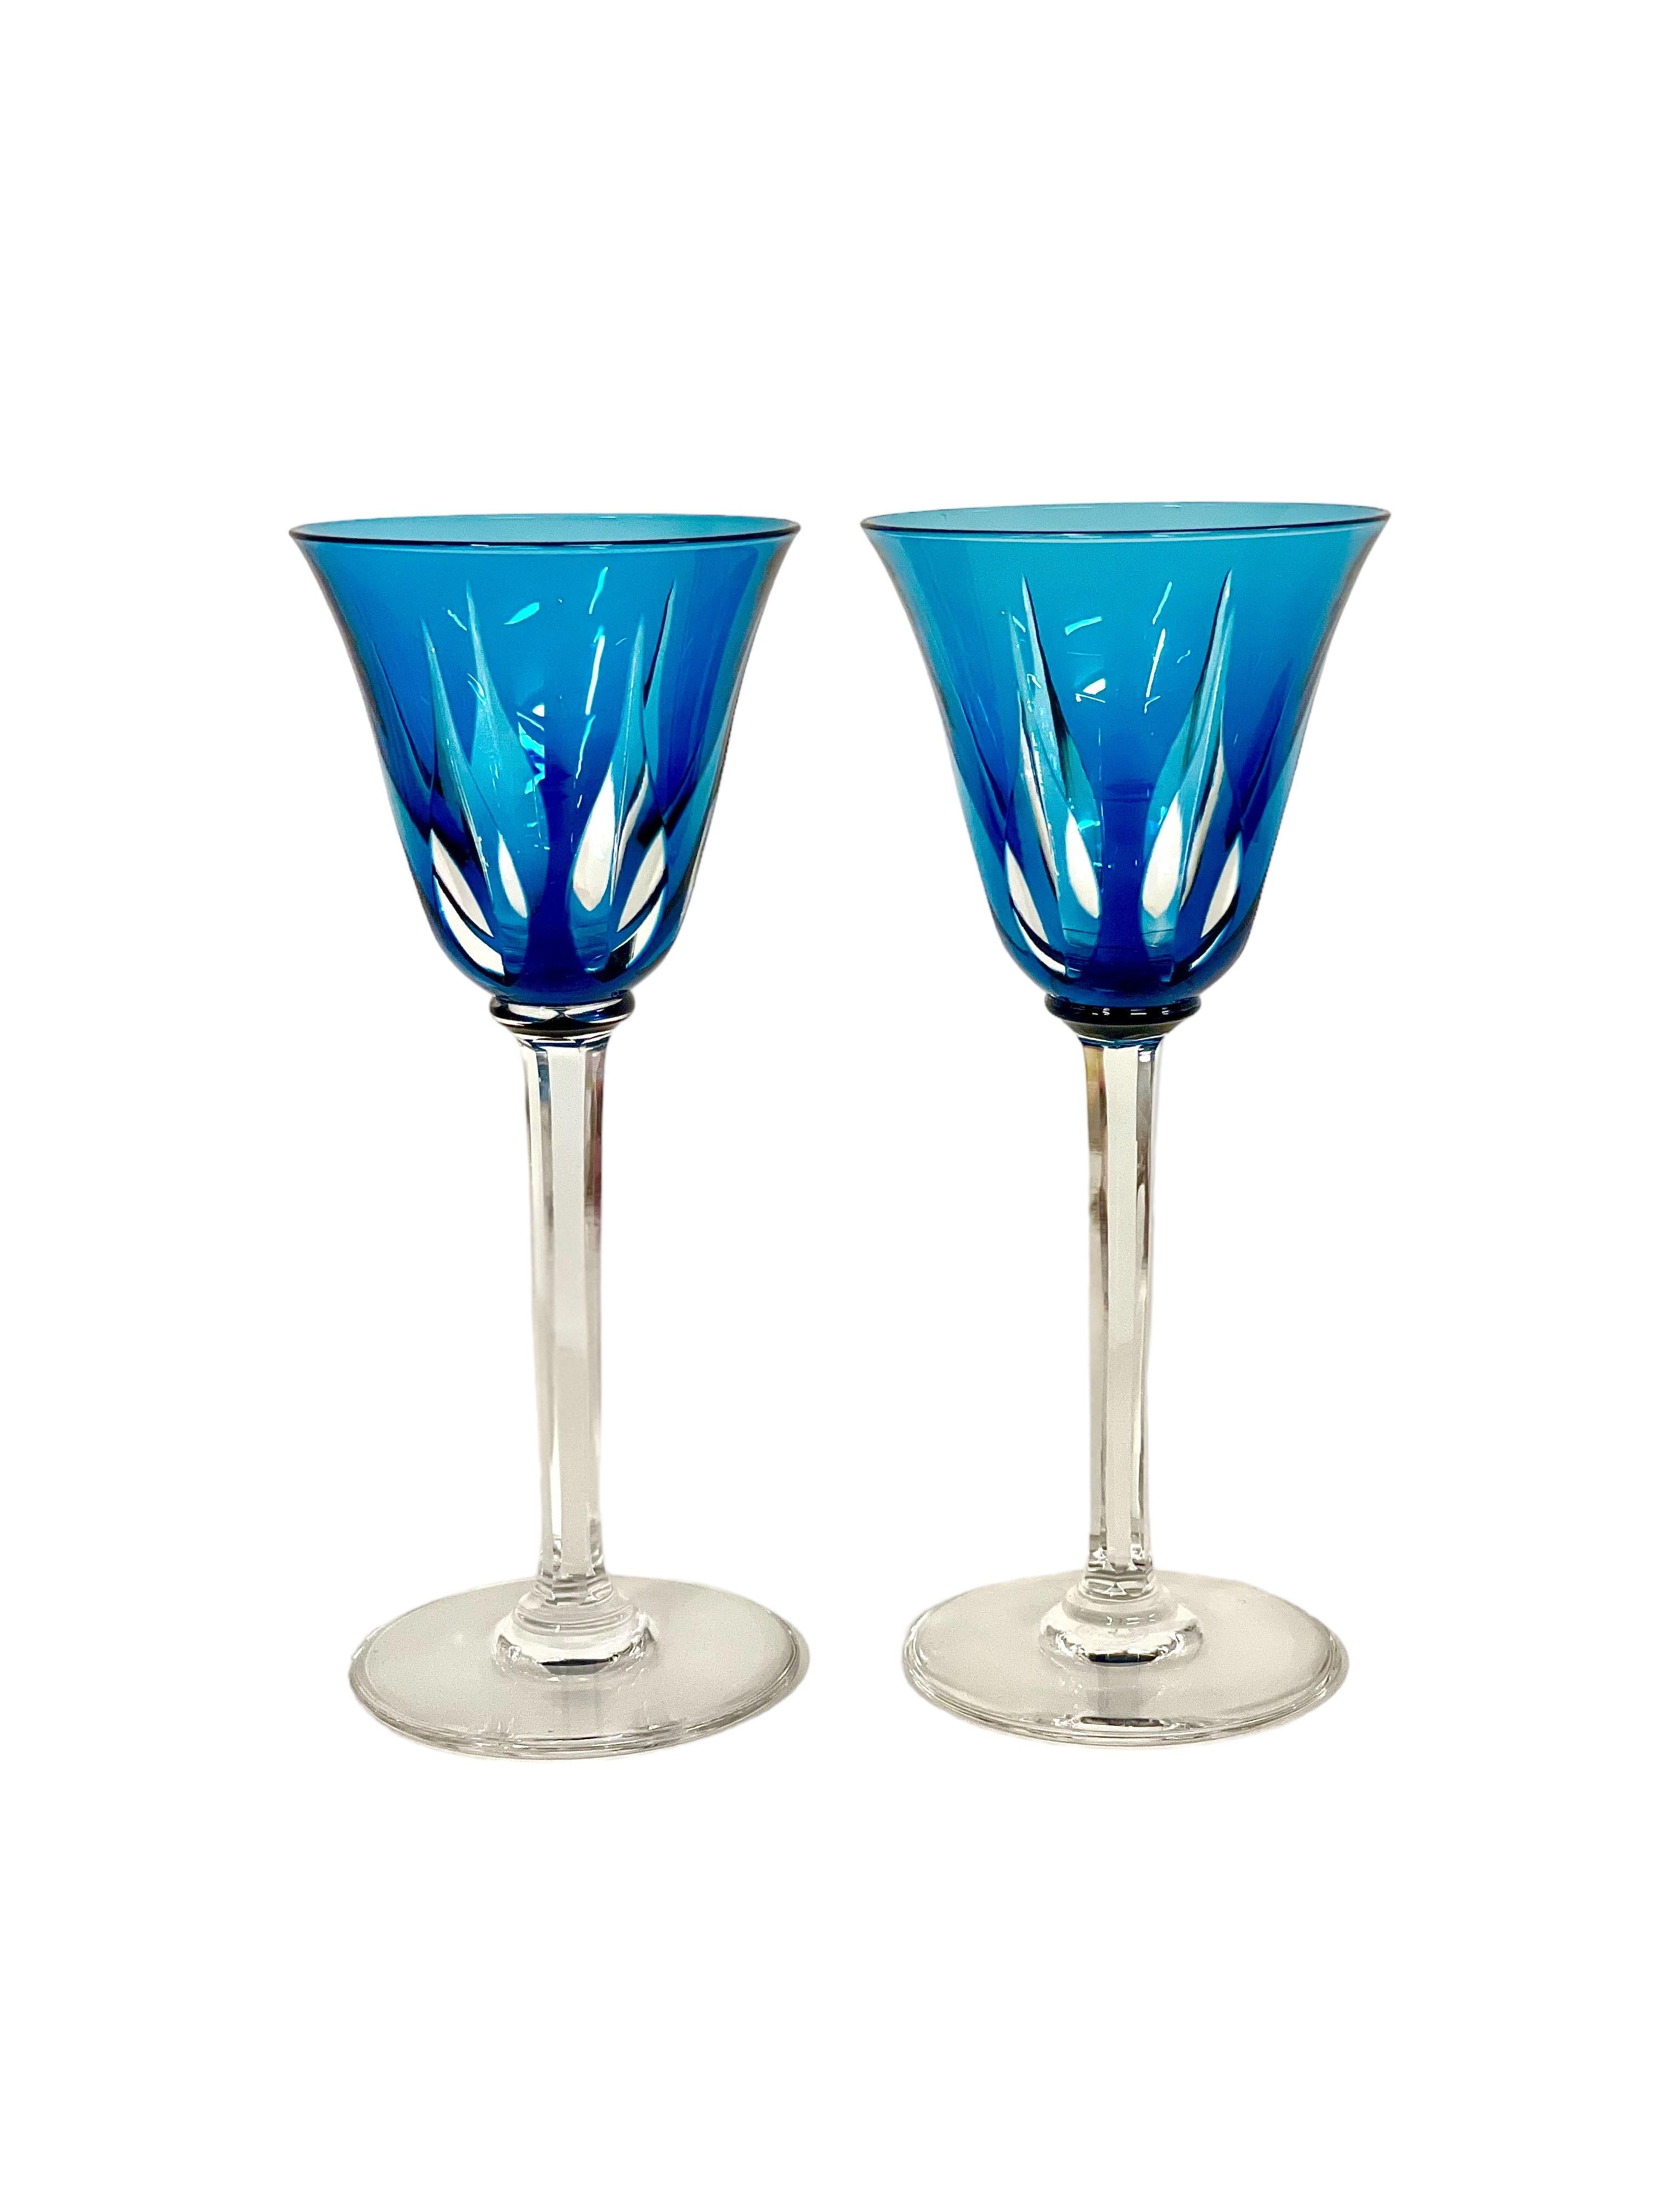 Saint Louis Set of Eleven Colourful Crystal Glasses  For Sale 6